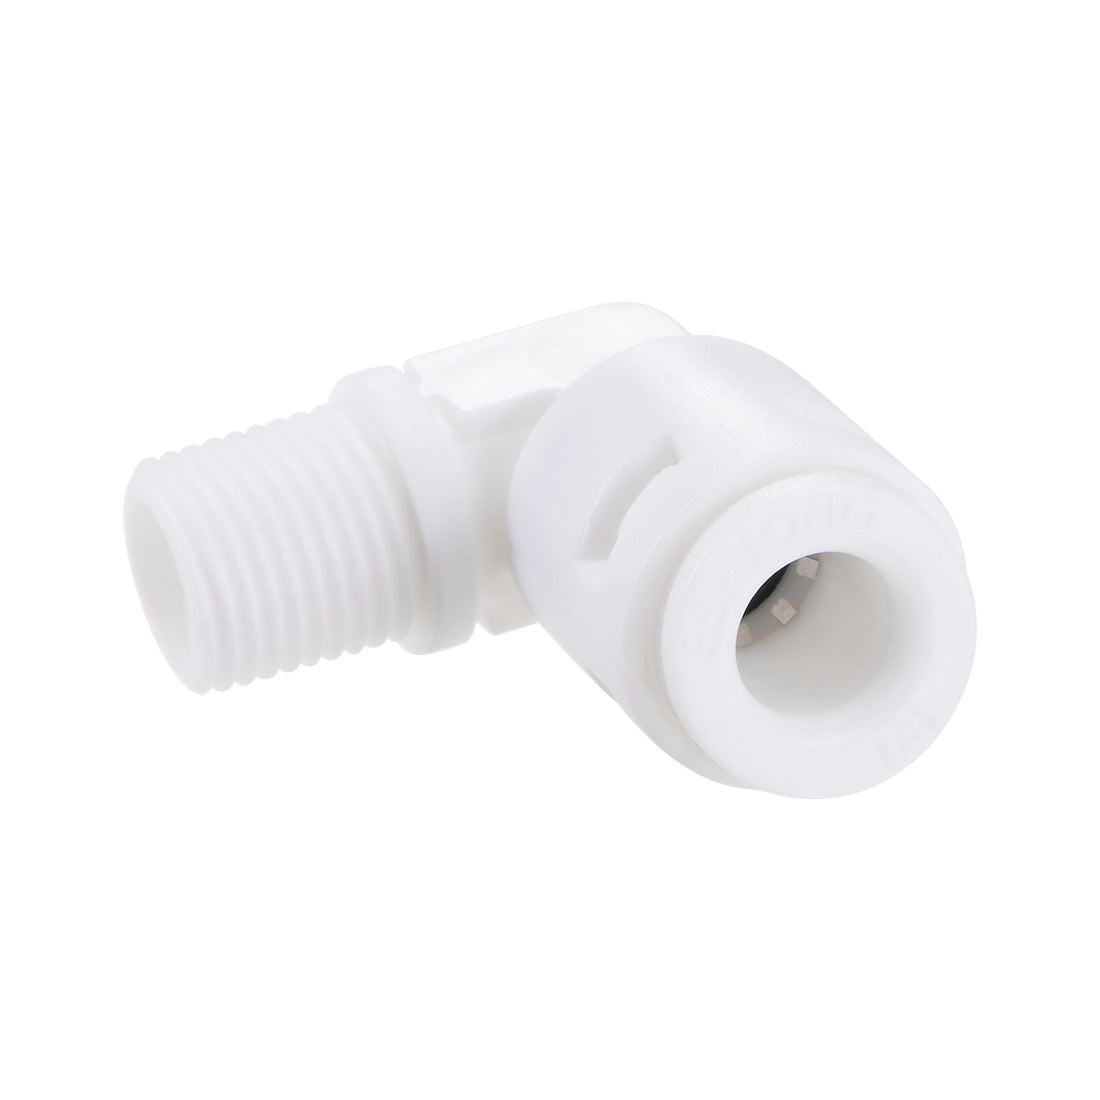 uxcell Uxcell Quick Connector L Type G1/8 Male Thread to 1/4" Tube, Connect Fittings for Ro Water Purifier, 26x26mm White 10Pcs